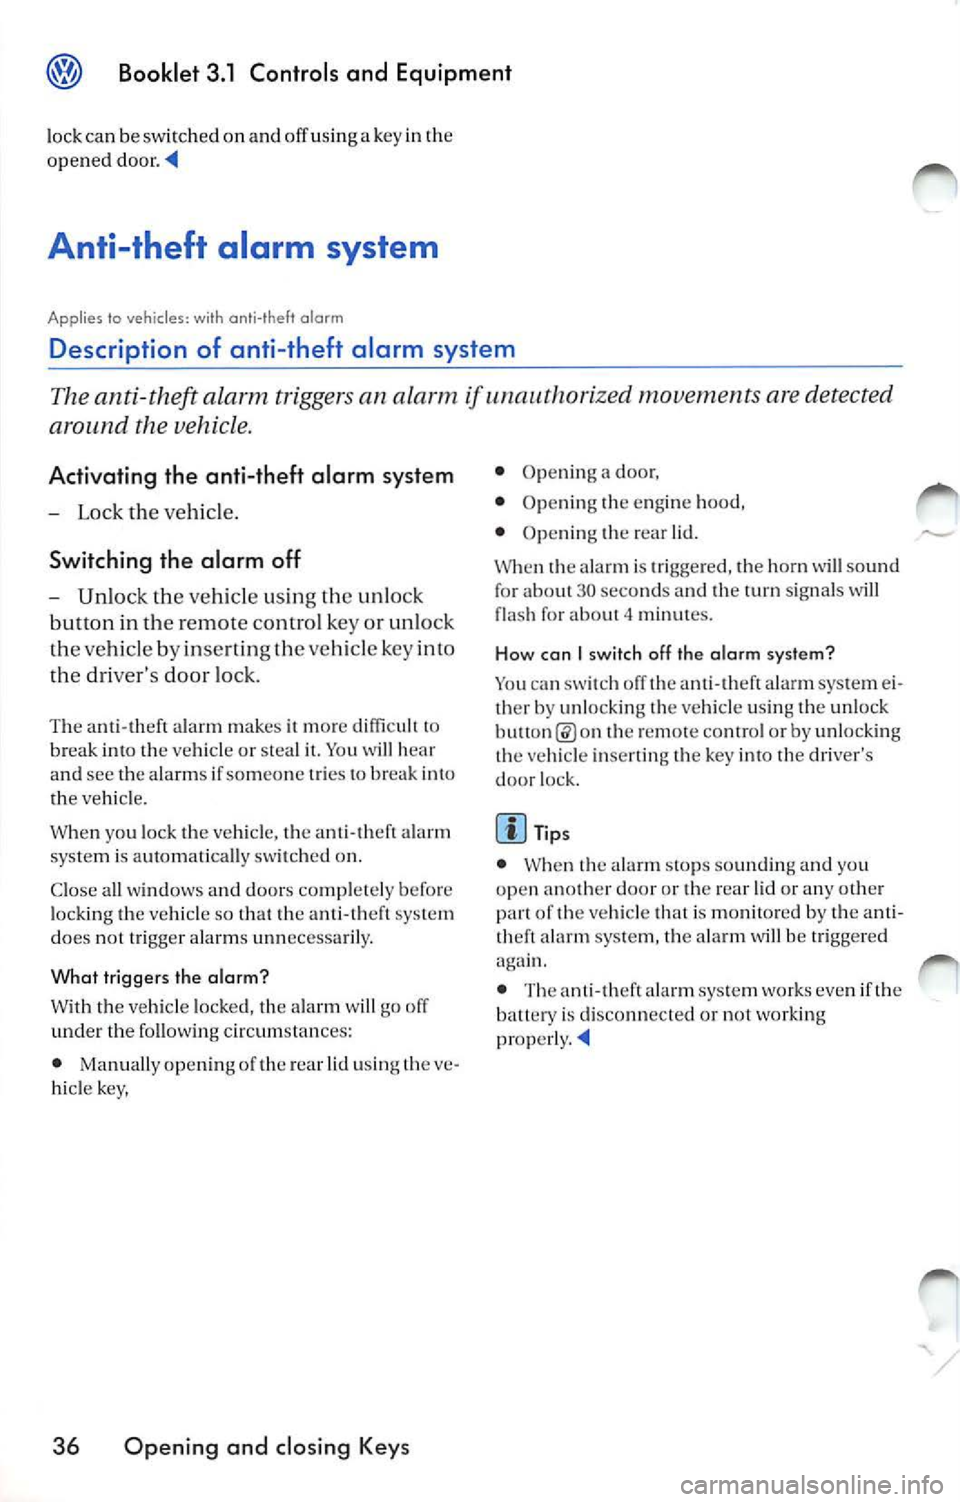 VOLKSWAGEN JETTA 2010  Owners Manual Booklet  3.1  Controls  and  Equipment 
lock ca n be  switch ed  on  and  off  using a key in th e 
opened  door. 
Anti-theft  alarm  system 
Applies  to vehicles:  with  anti-theft alarm 
Description